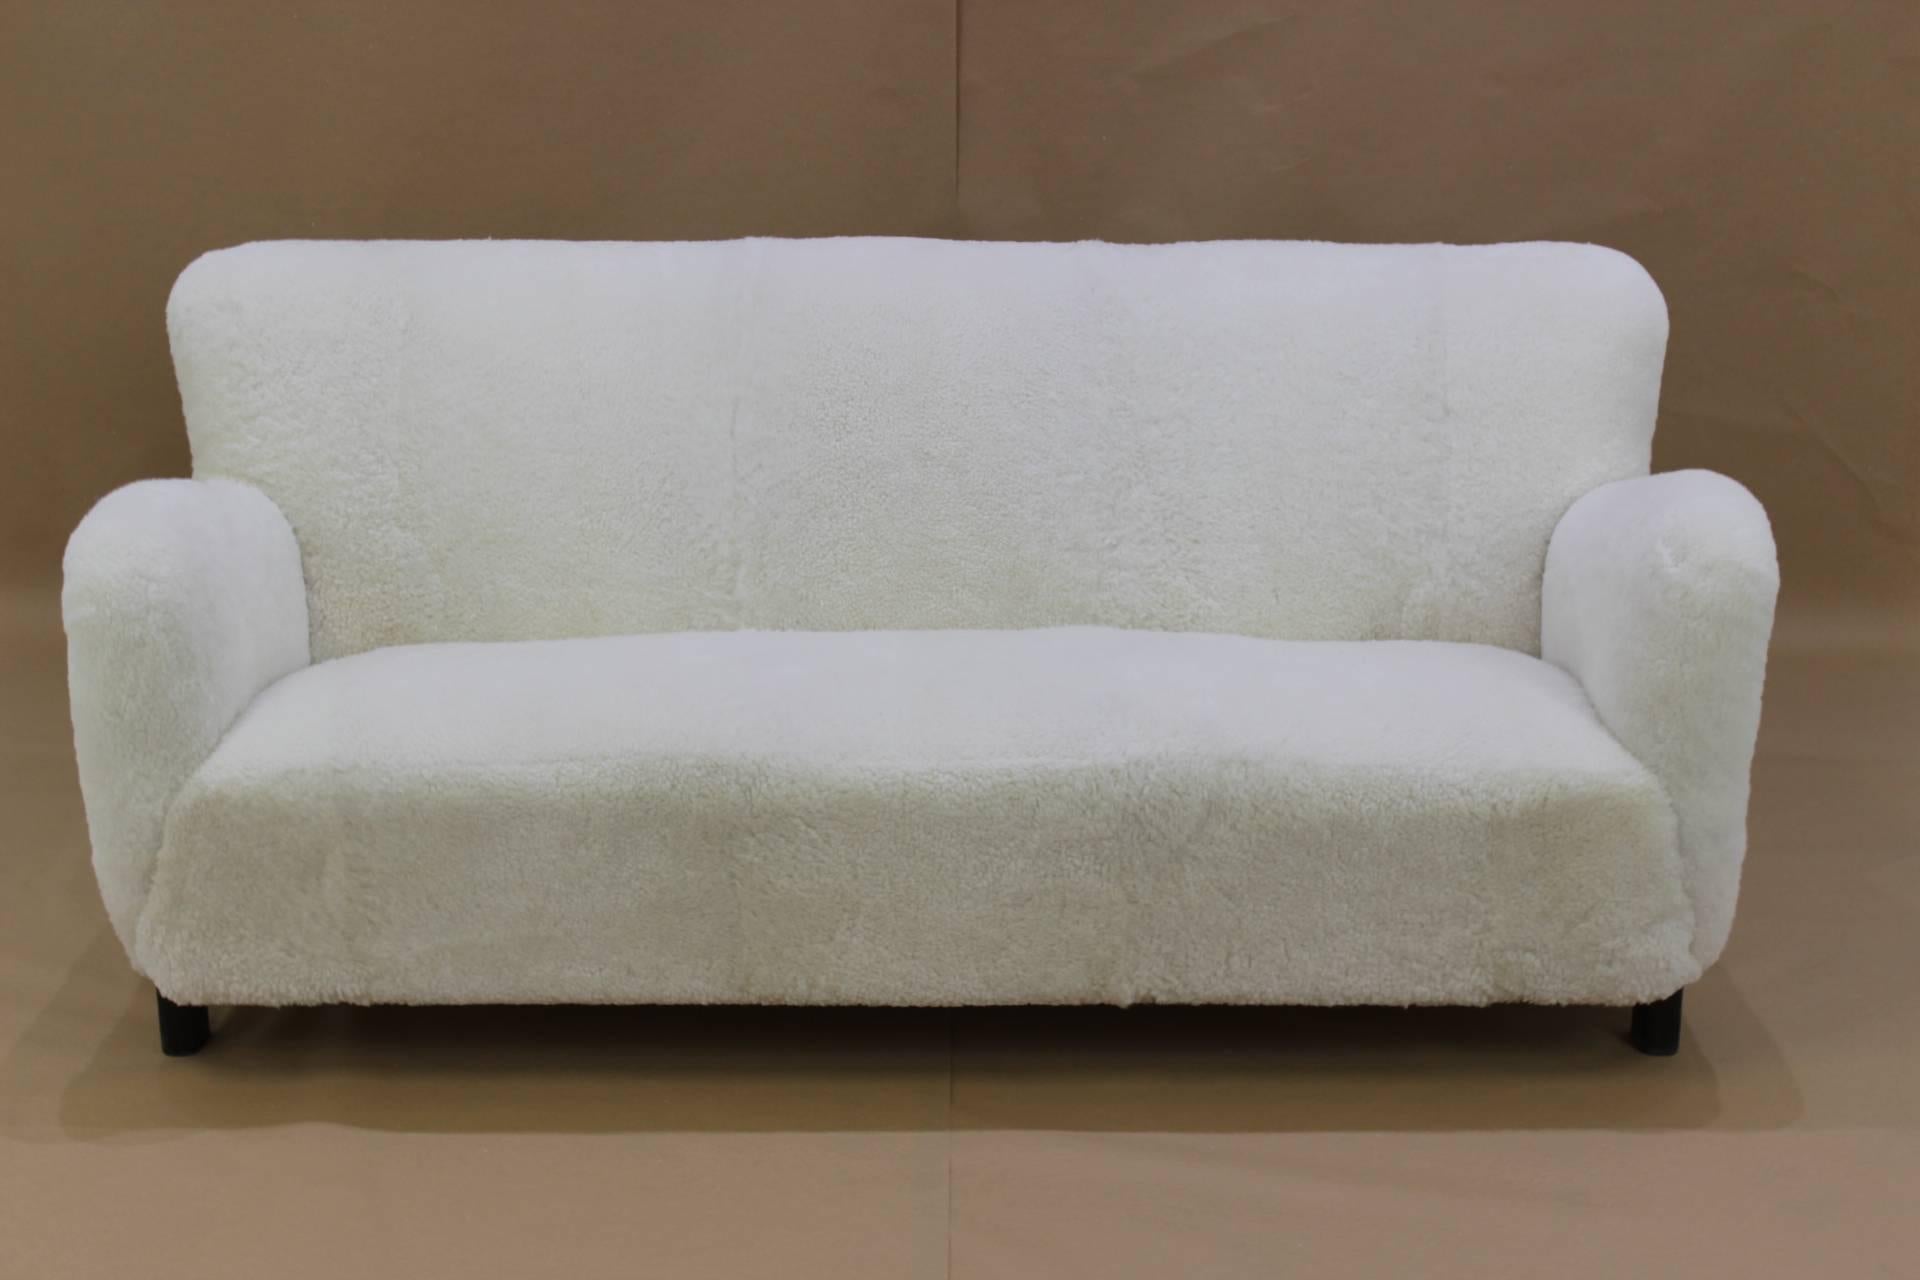 Beautiful Danish "Fritz Hansen" sofa in sheepskin upholstery suitable for open spaces.
The sheepskin were carefully selected and their weren't chemically treated (to be more white). The wooden legs are made of solid mahogany.